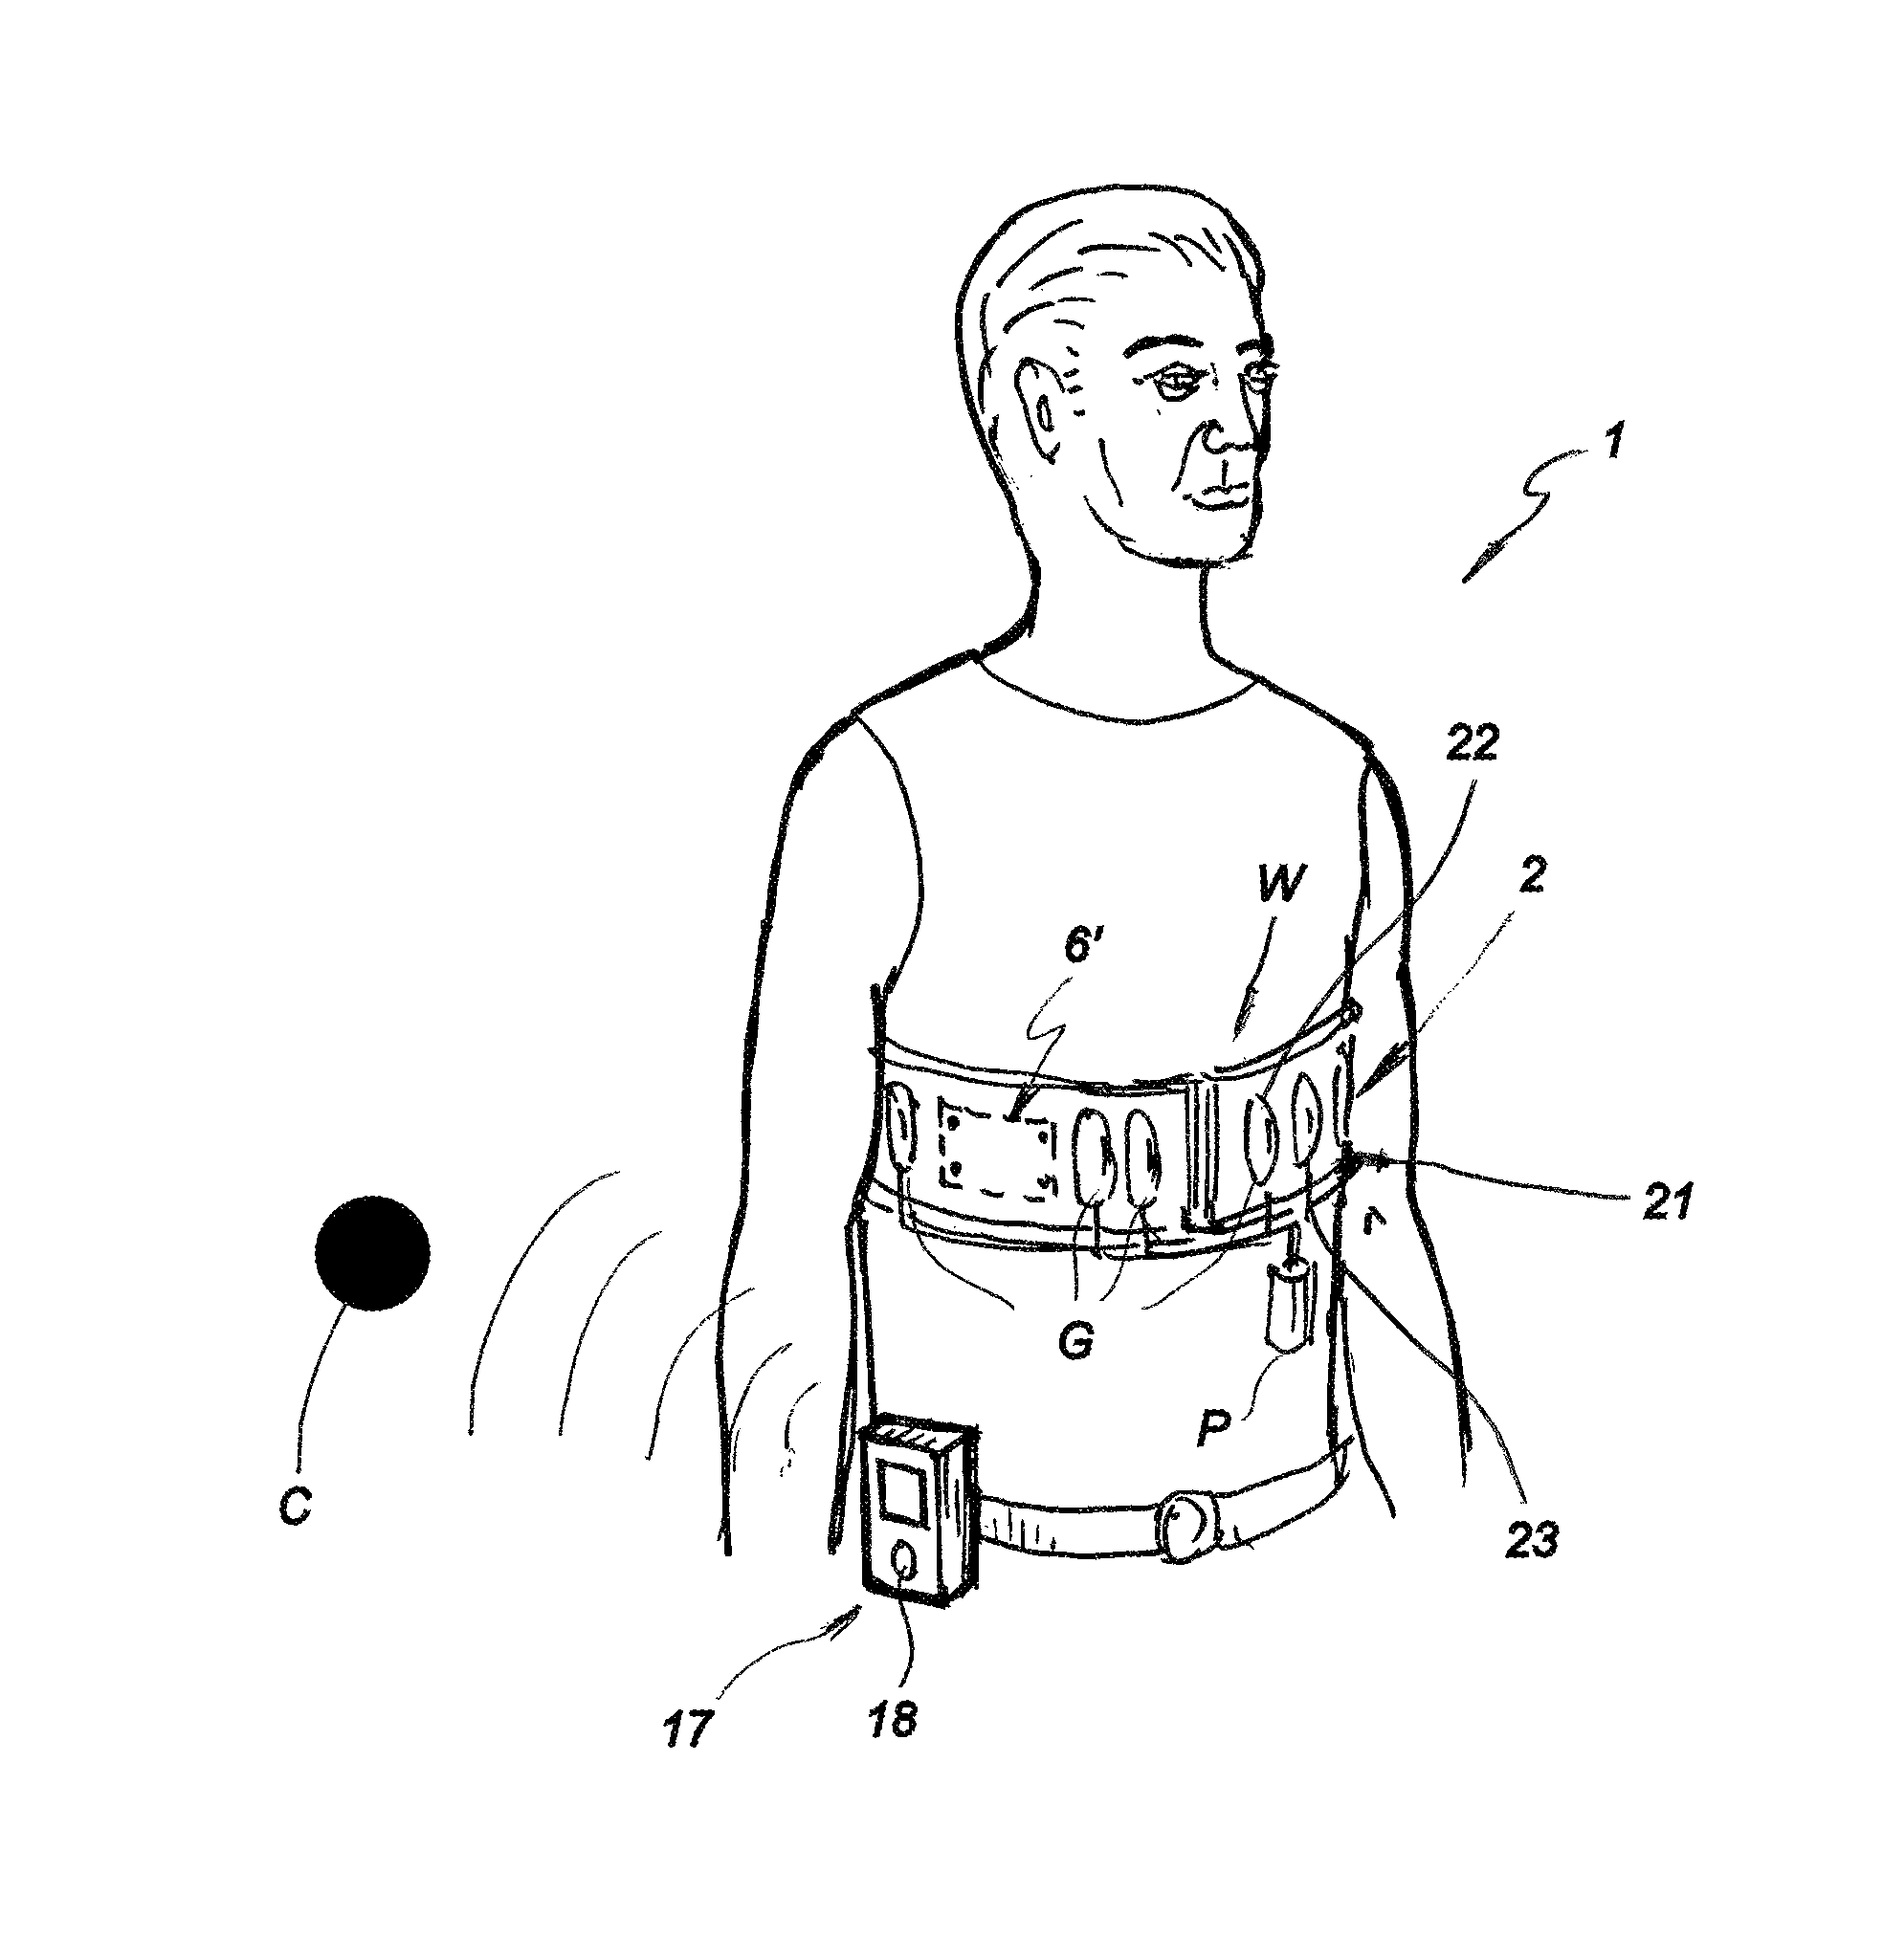 Sensor device for treatment and remote monitoring of vital biological parameters